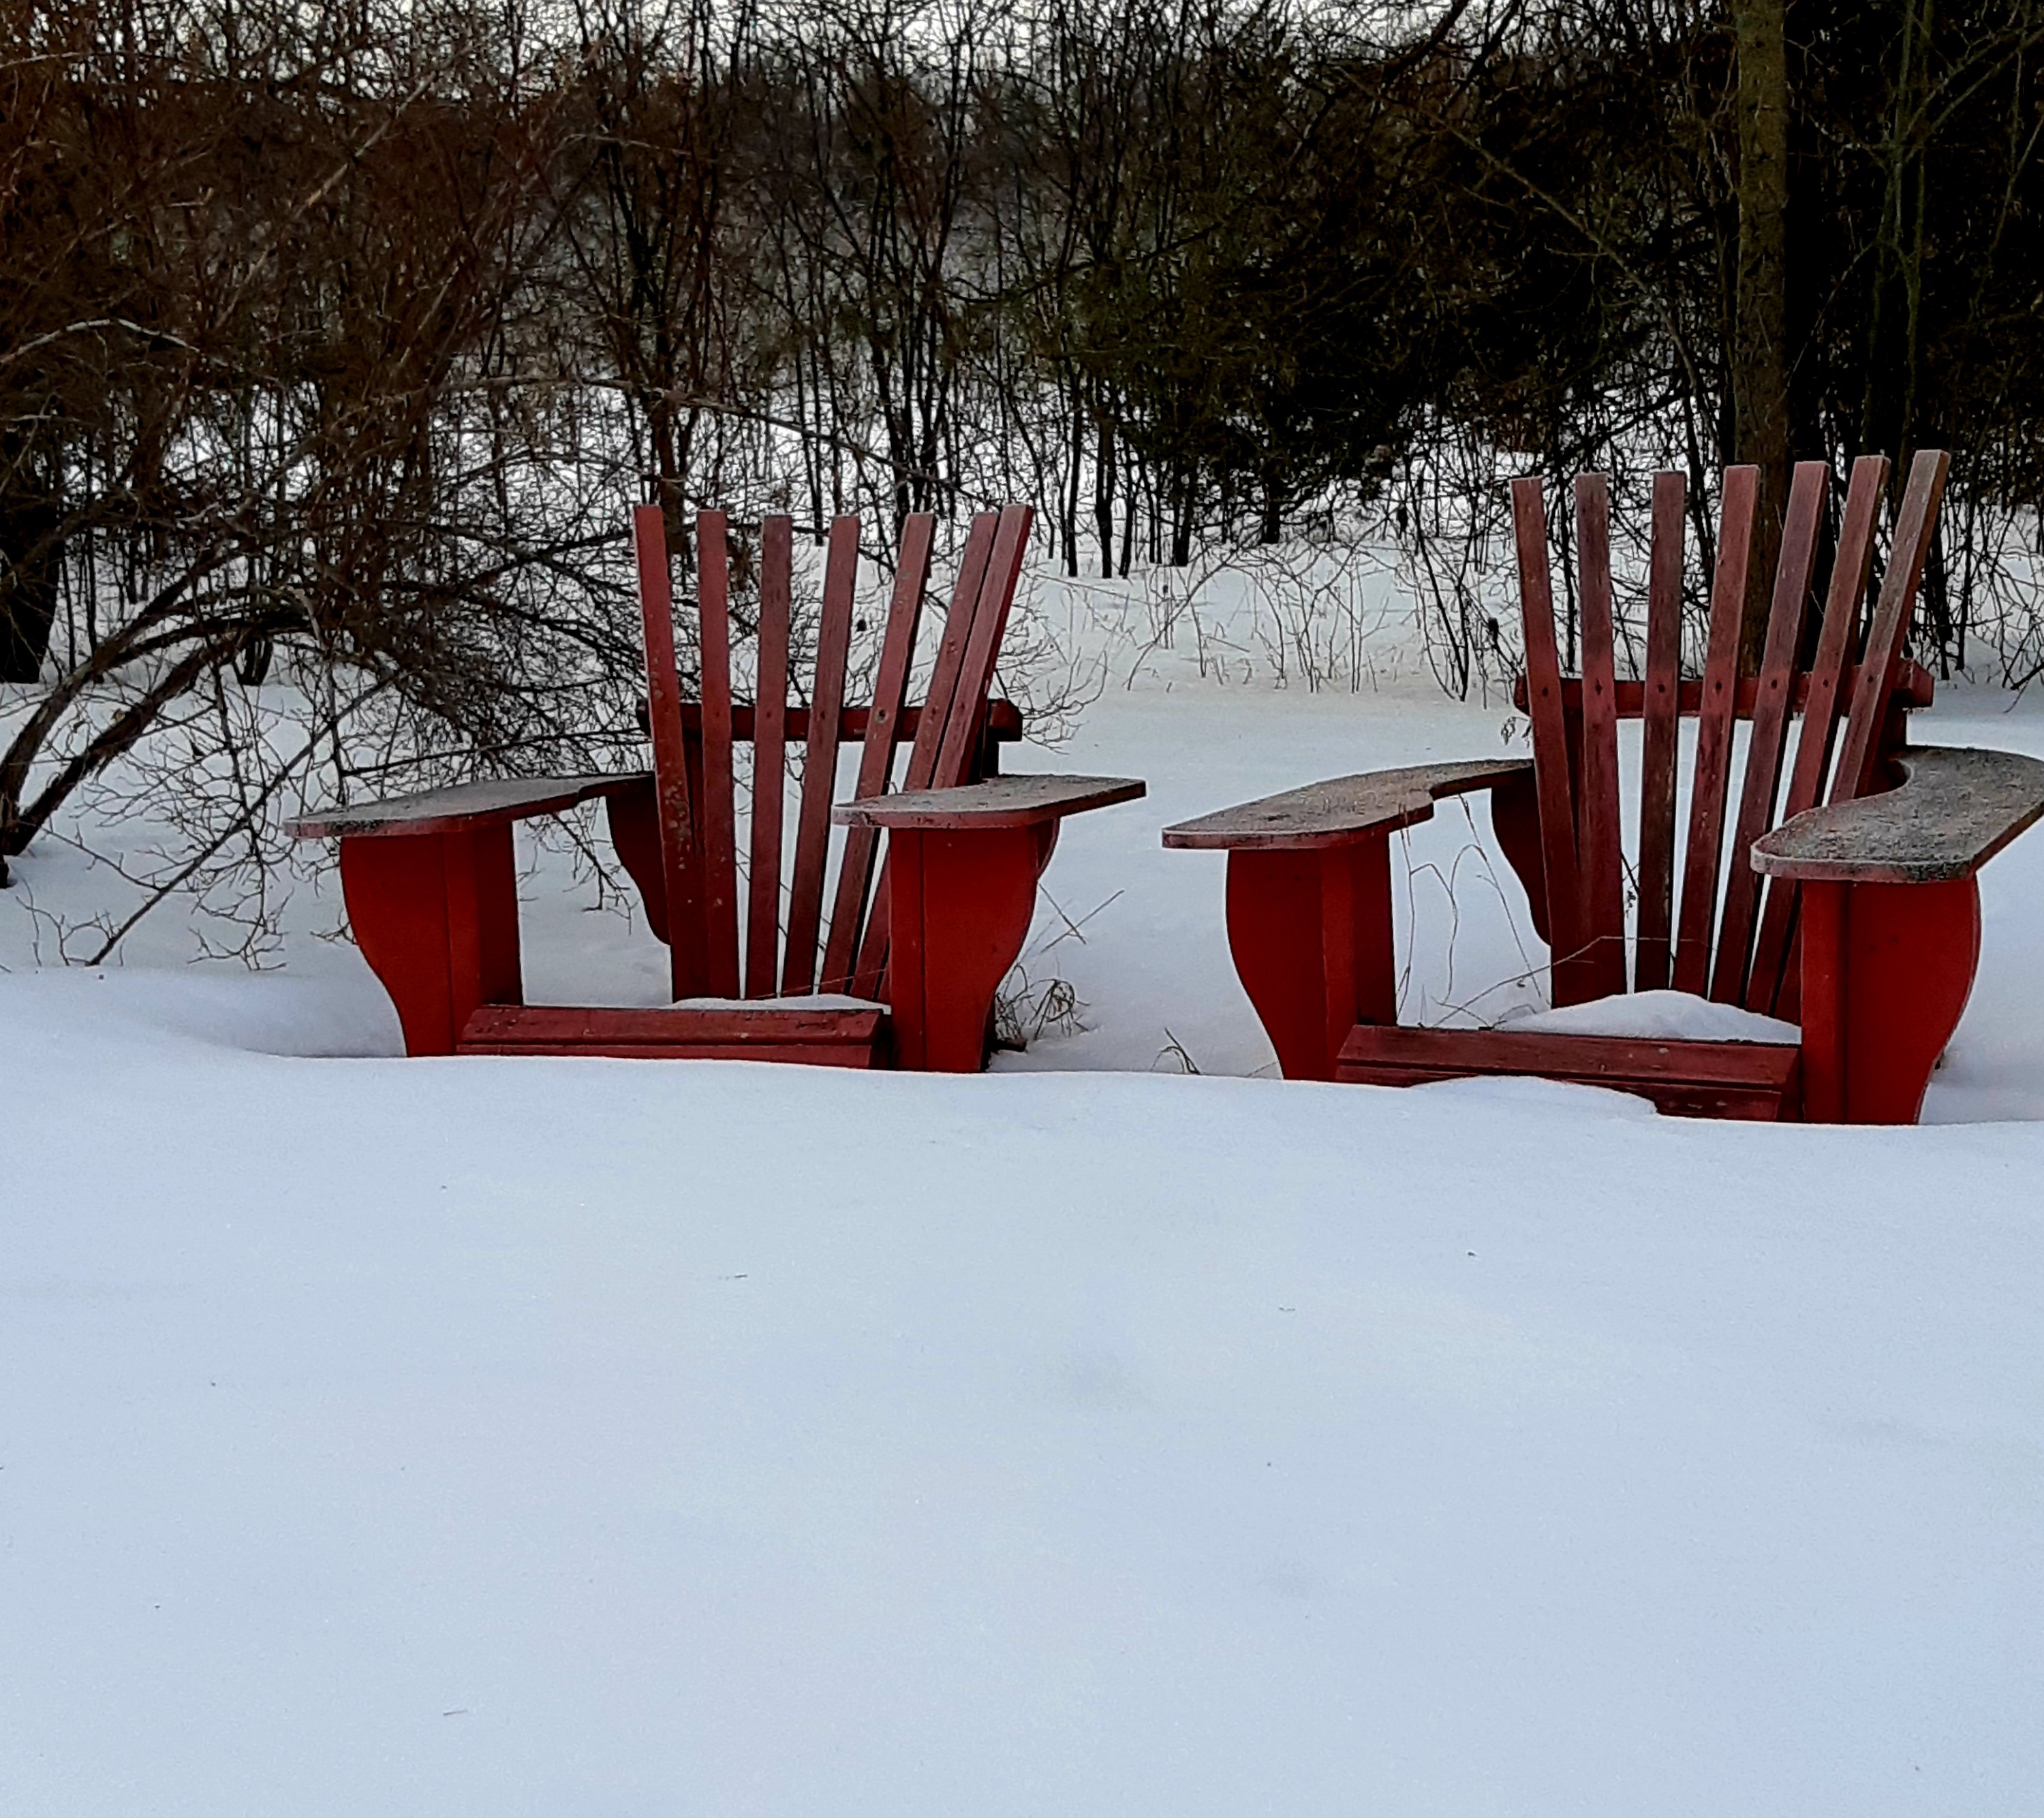 Picture of red Muskoka chairs in the snow